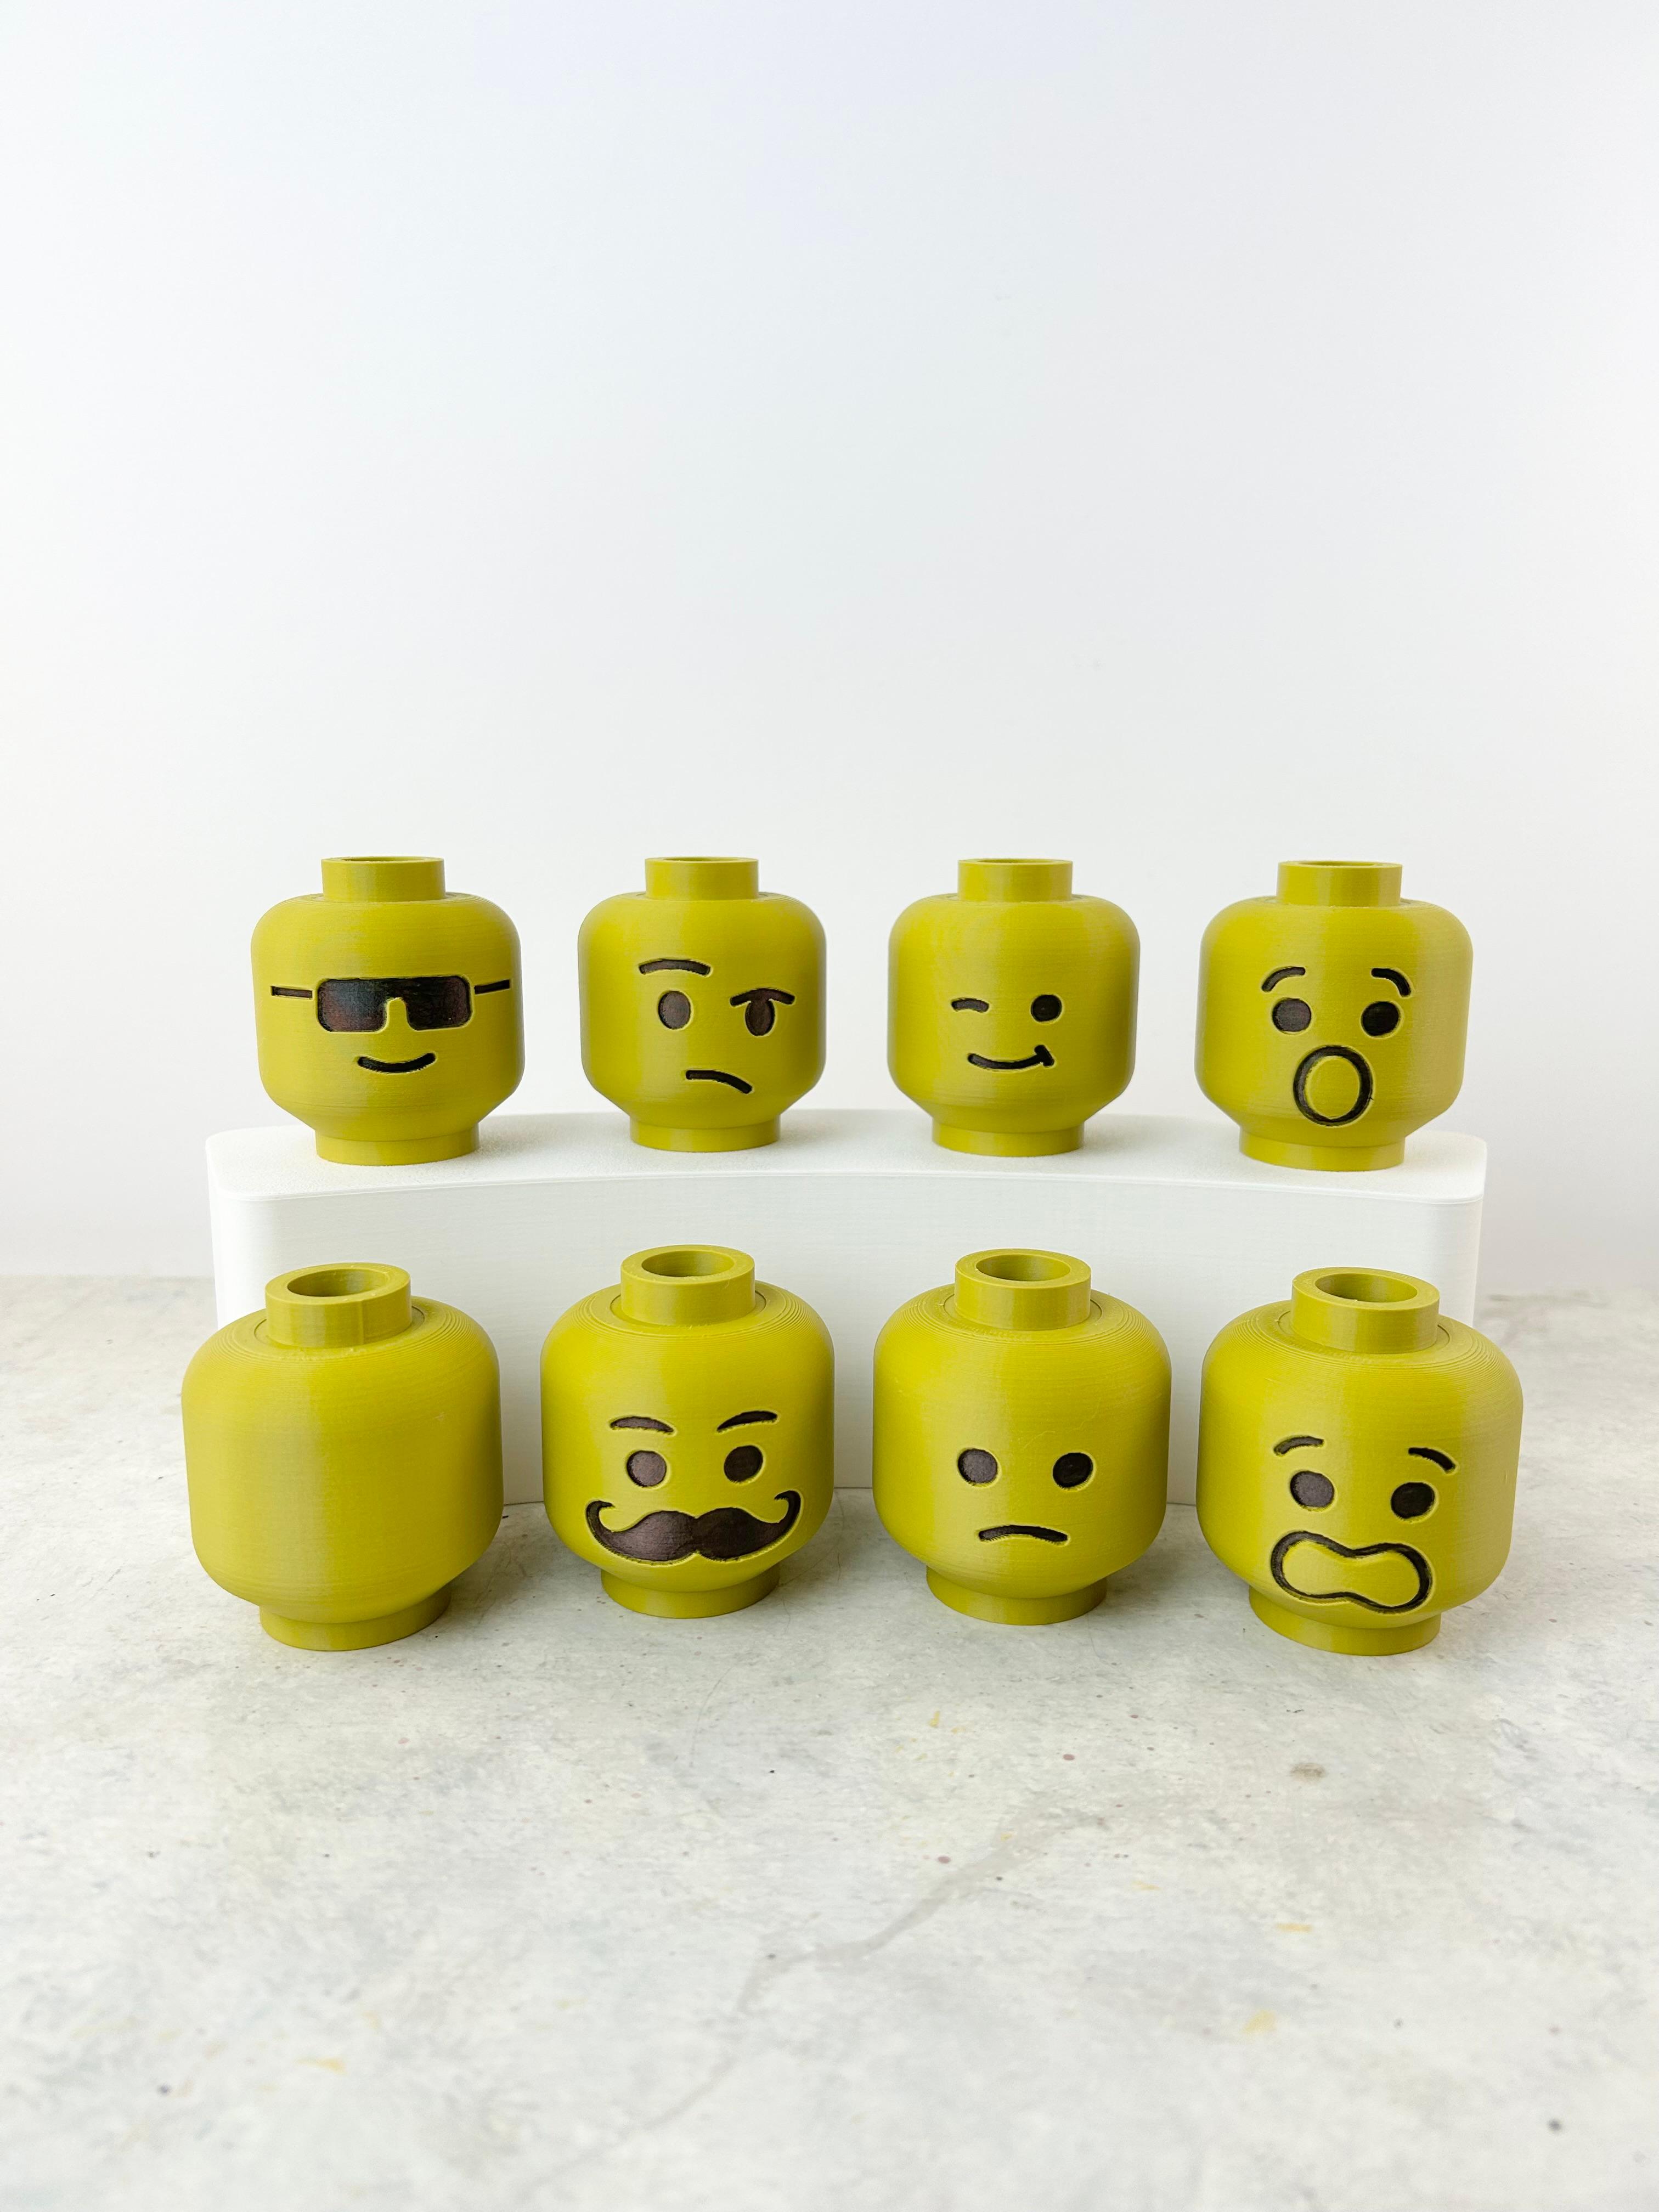 Head Collection (6:1 LEGO-inspired brick figure heads) 3d model